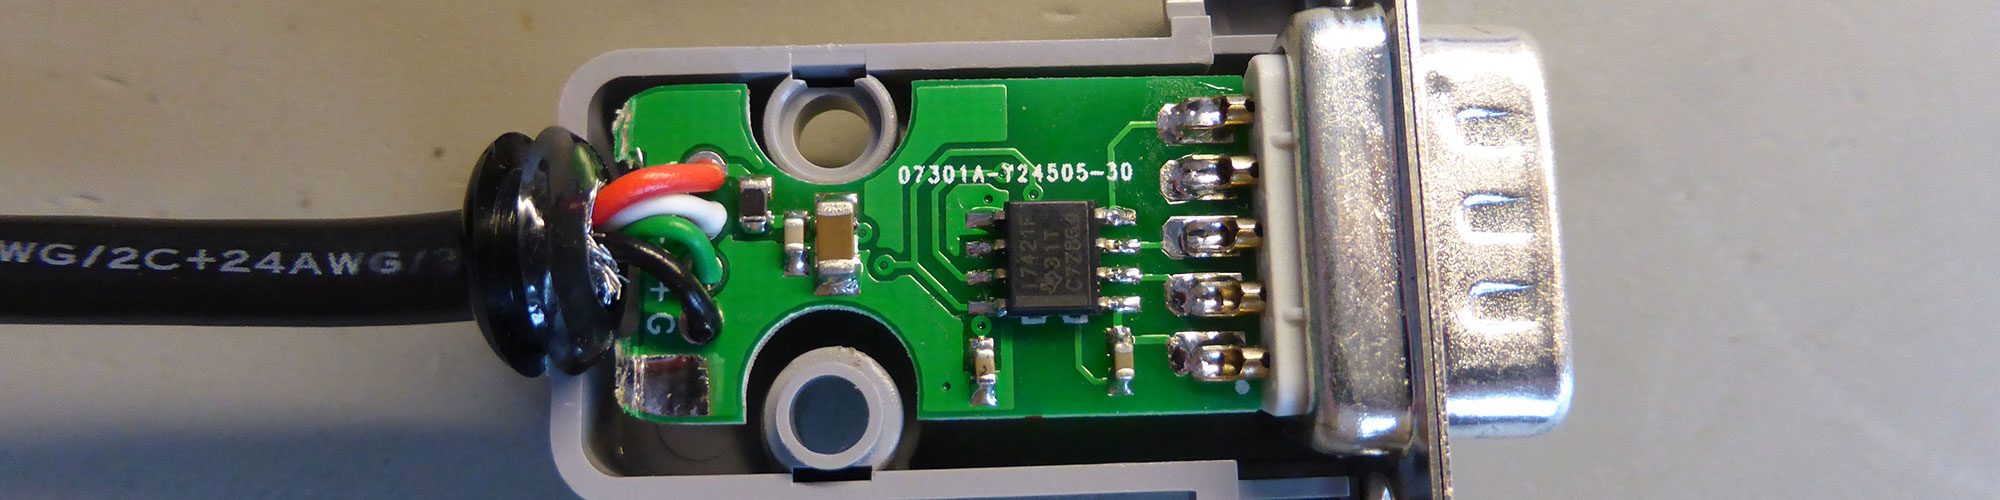 Maynuo M9812 Serial to USB Adapter